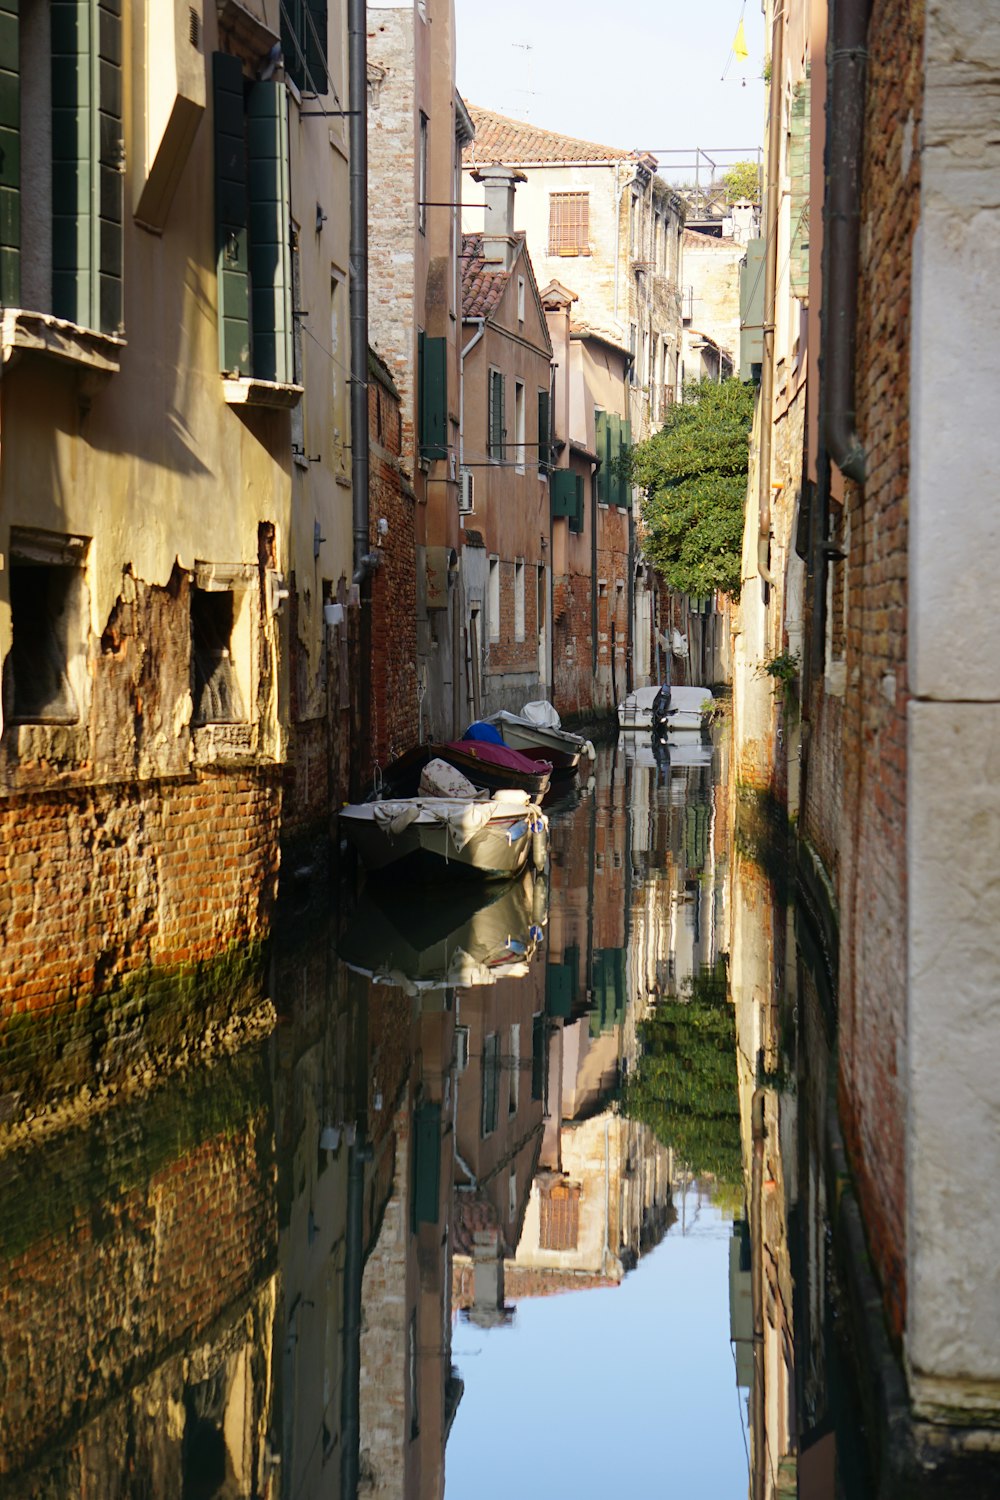 a narrow canal with a boat in the middle of it